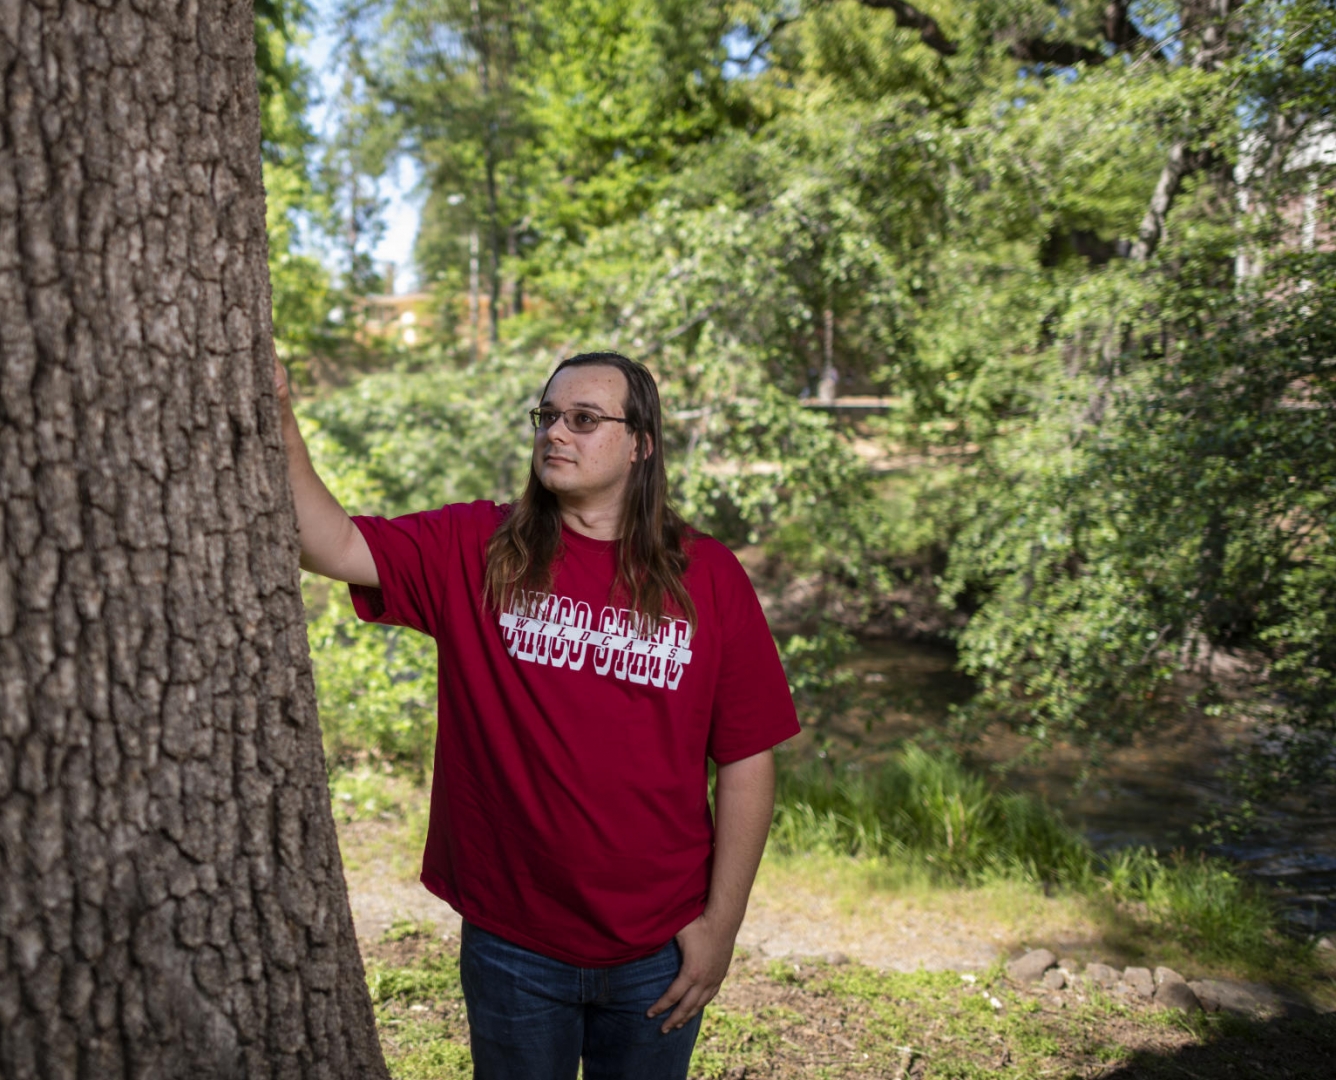 He-Lo Ramirez stands with his hand on a valley oak tree trunk near the waters of Big Chico Creek.